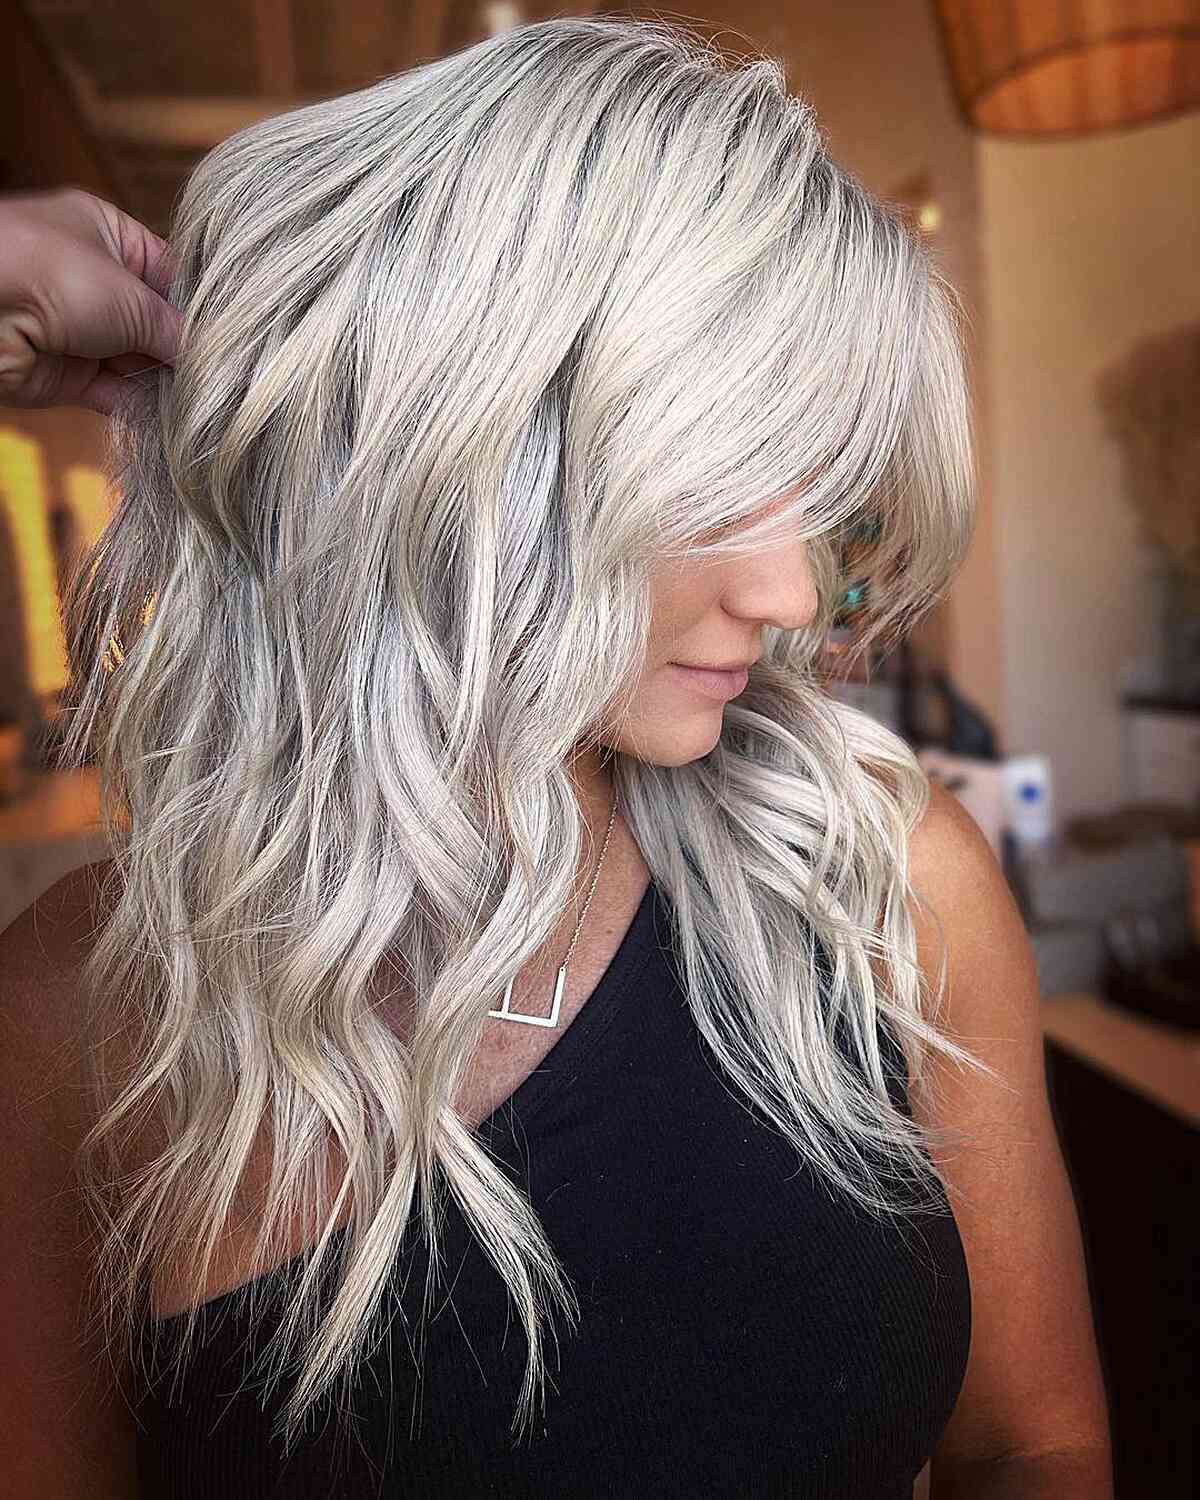 23 Stunning White Hair Color Ideas To Try In 2023 | Hair.com By L'Oréal